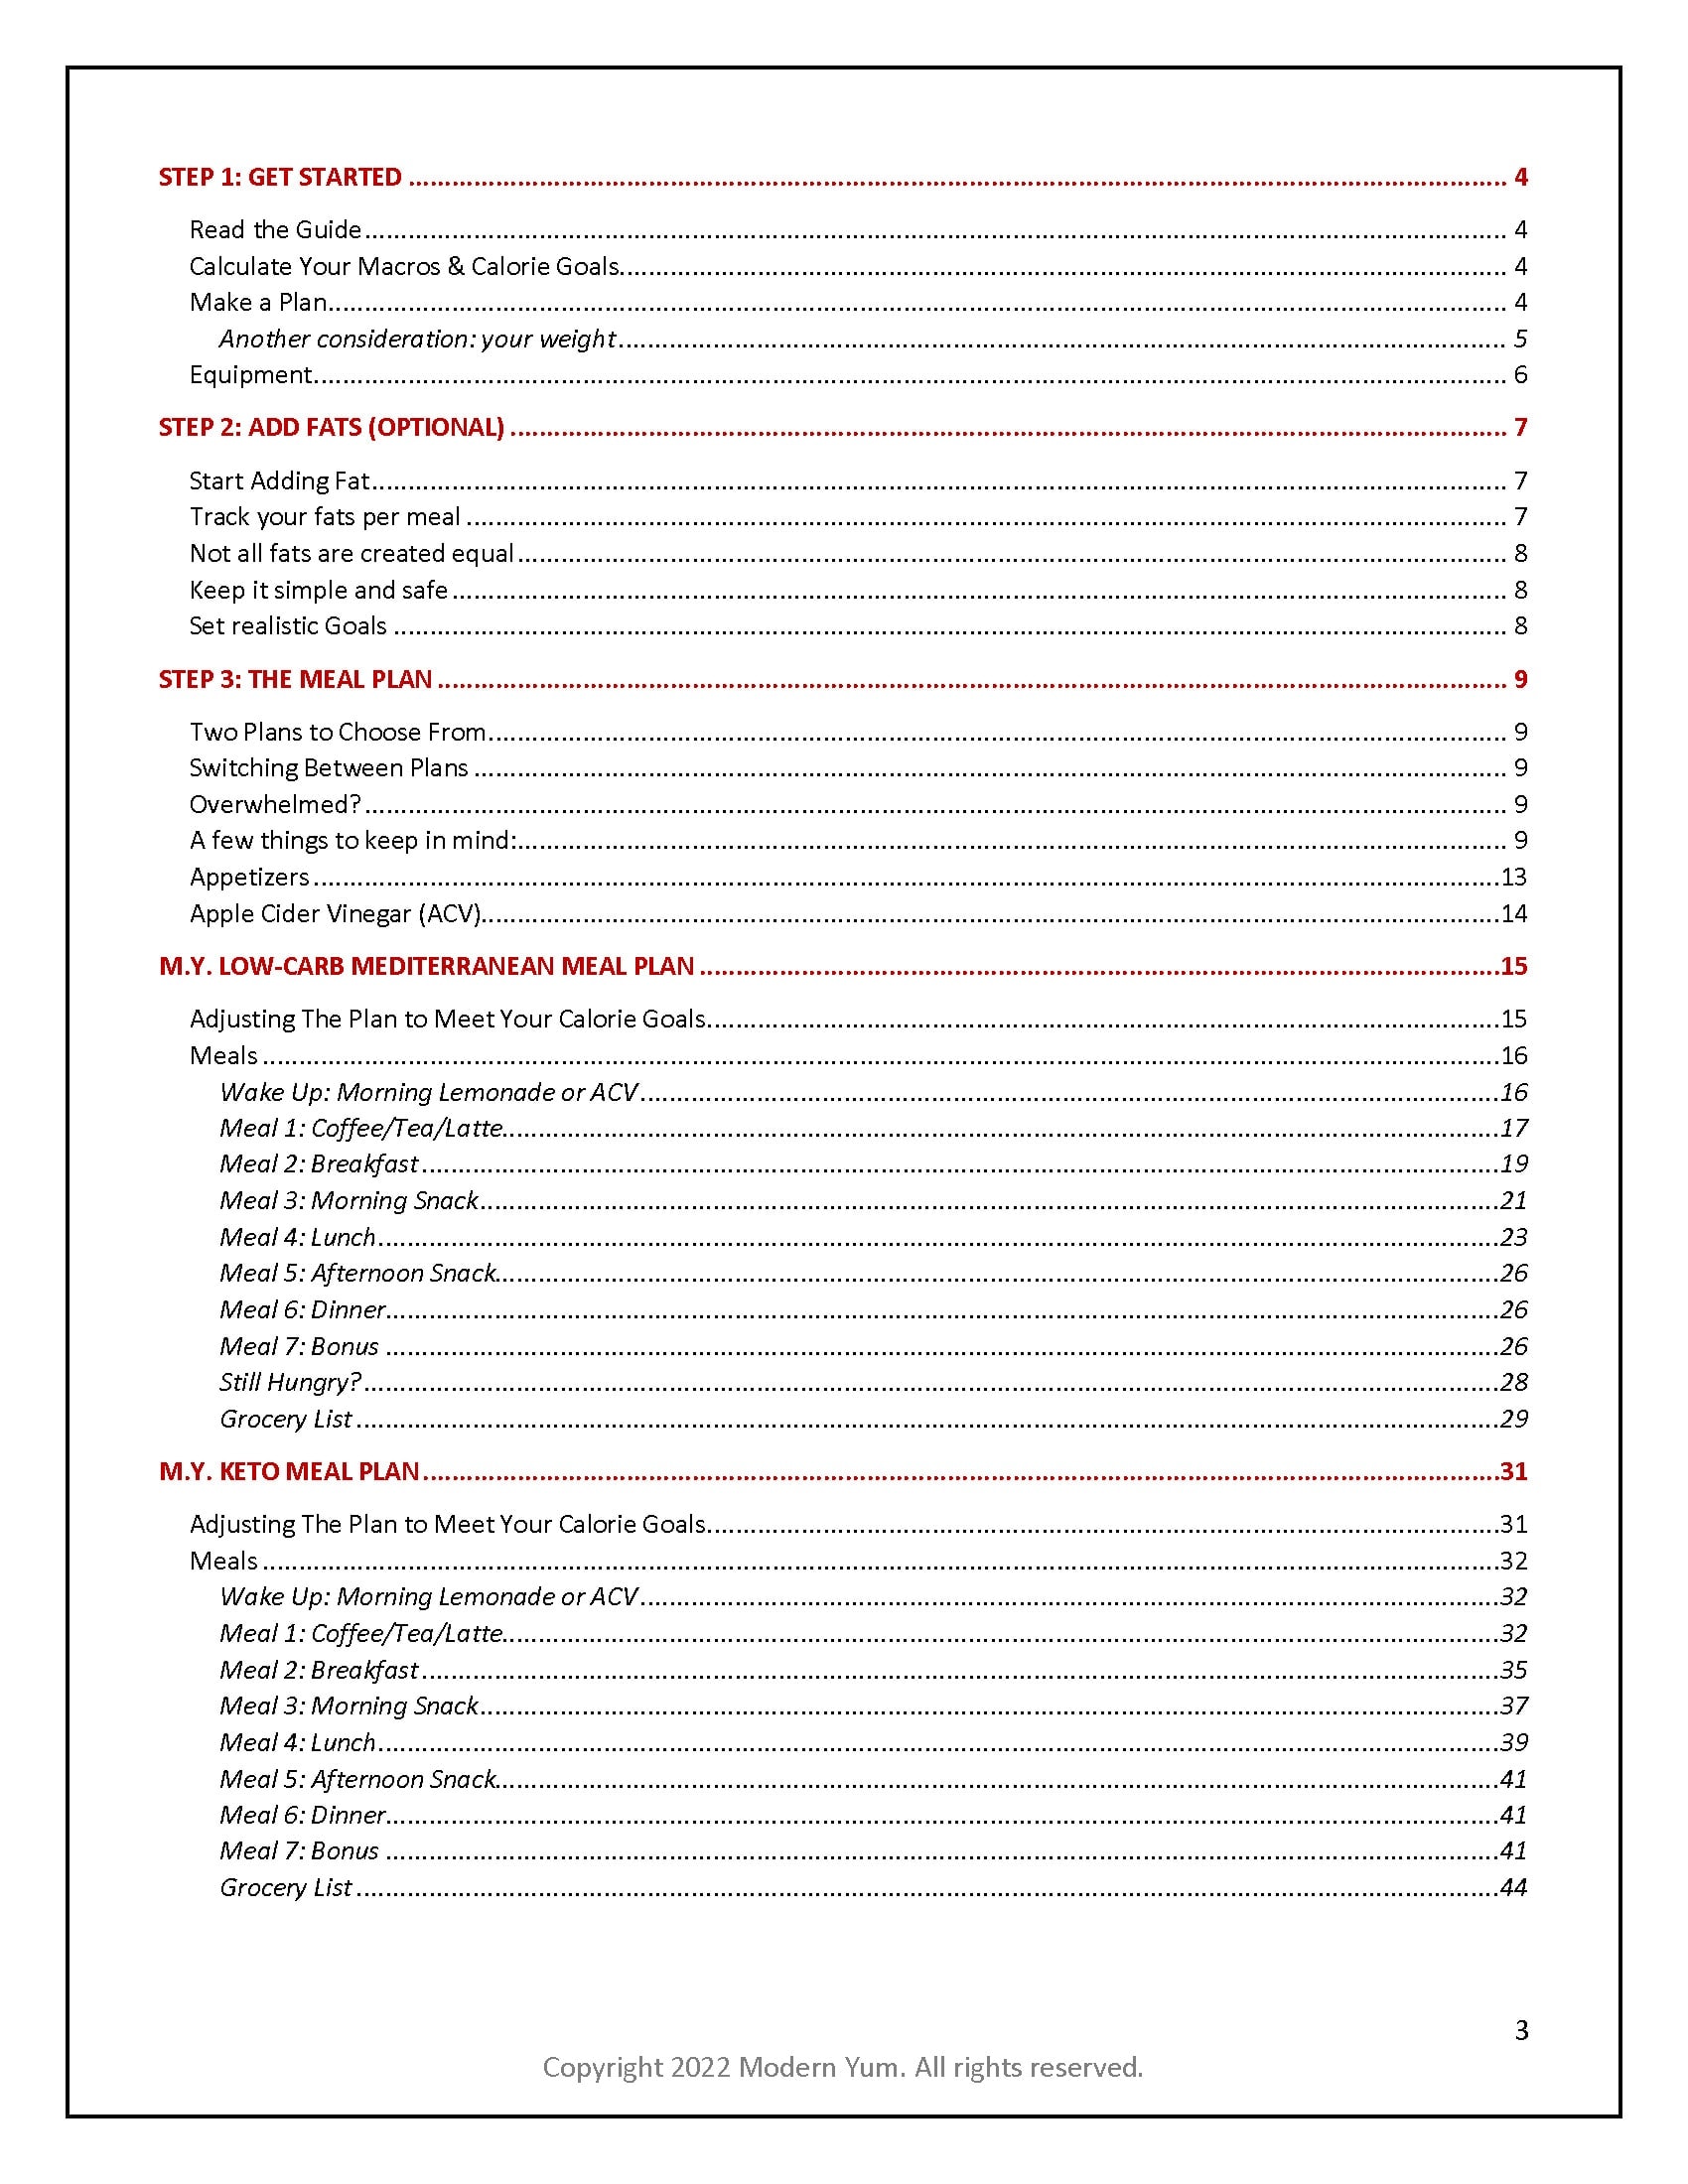 Page 3: Table of Contents